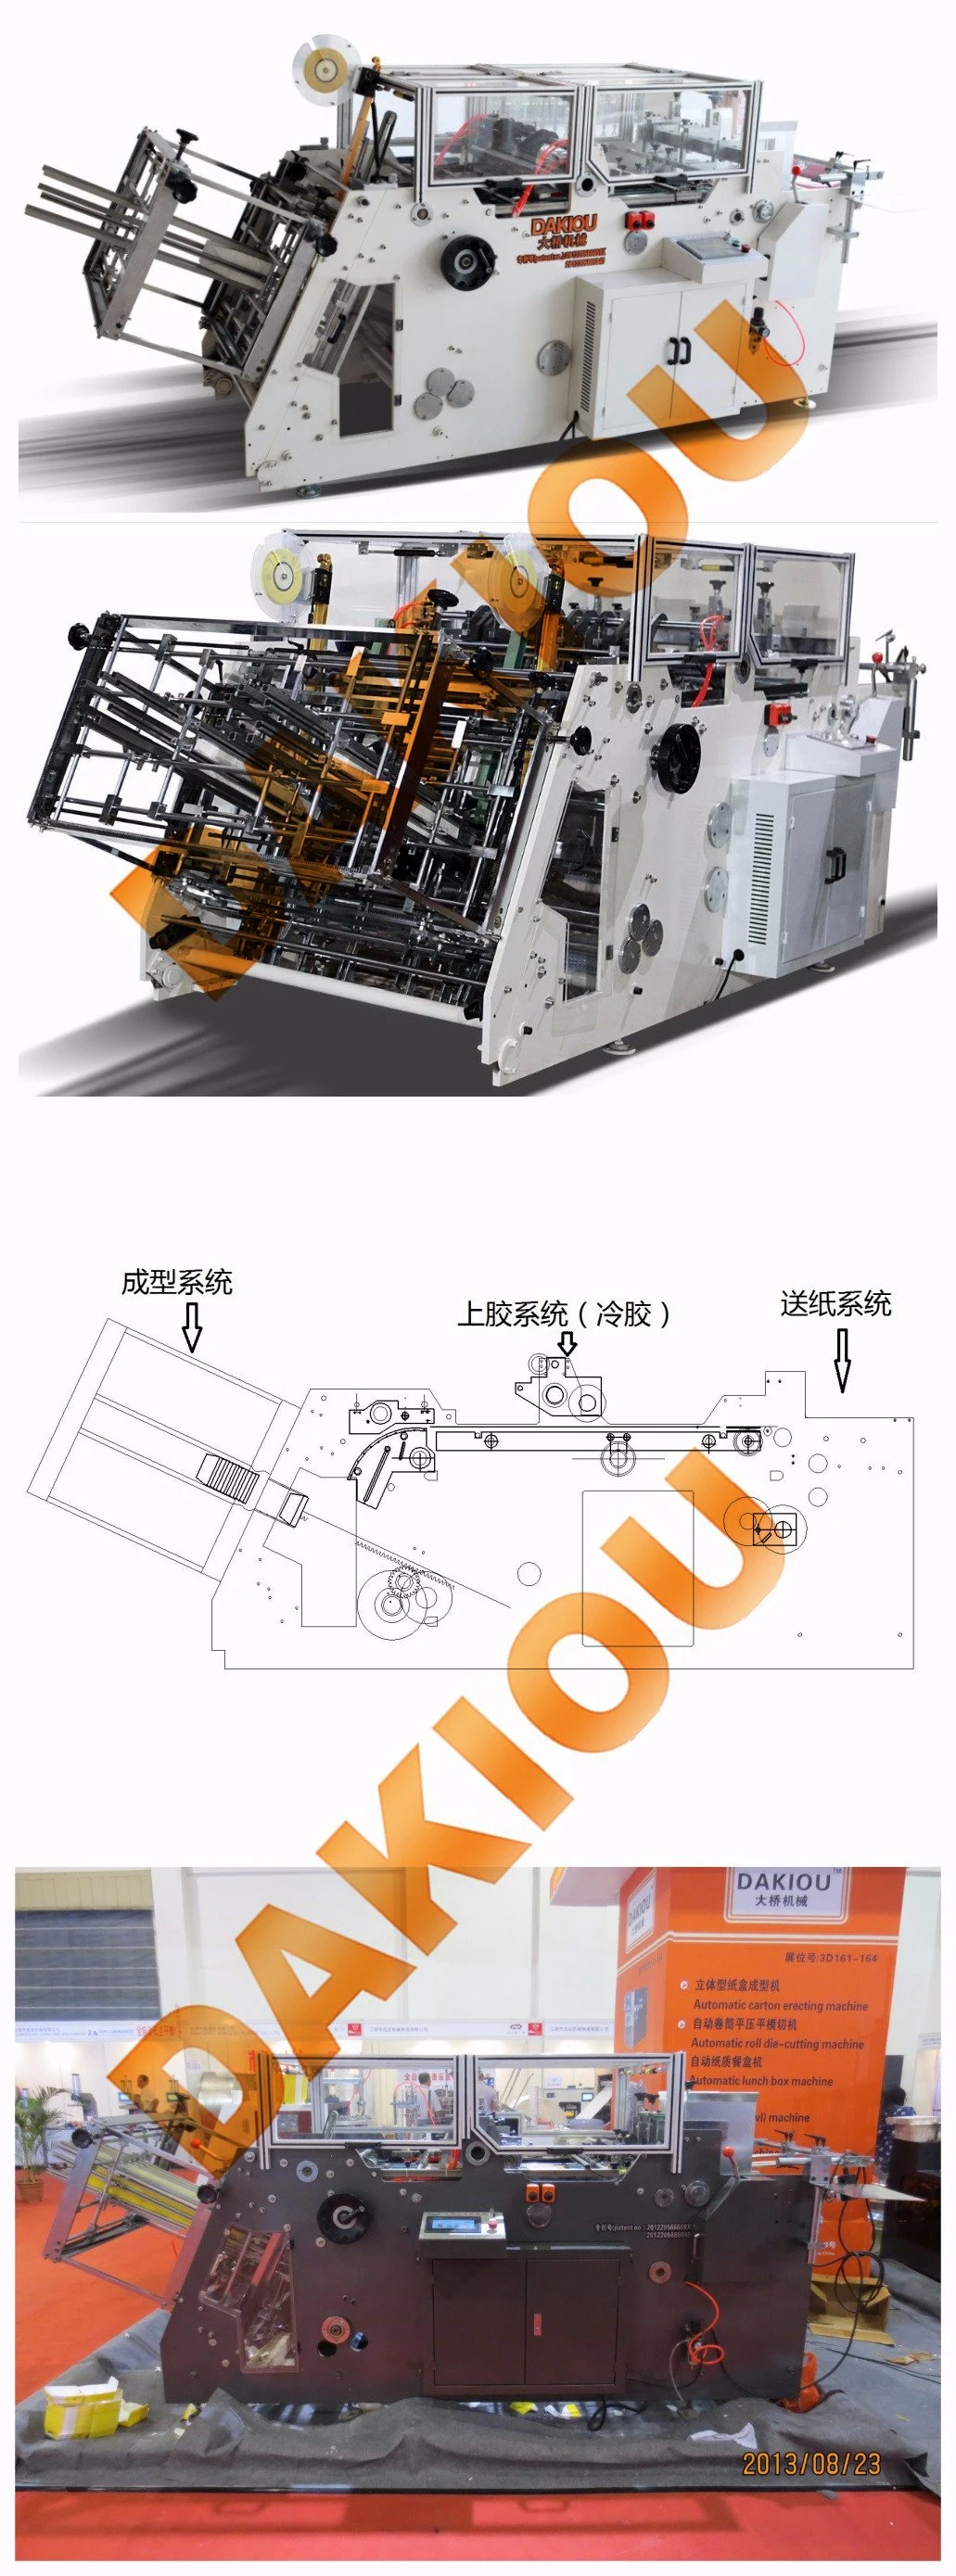 Disposable Paper Folded Takeout Box/Food Container Forming Machine